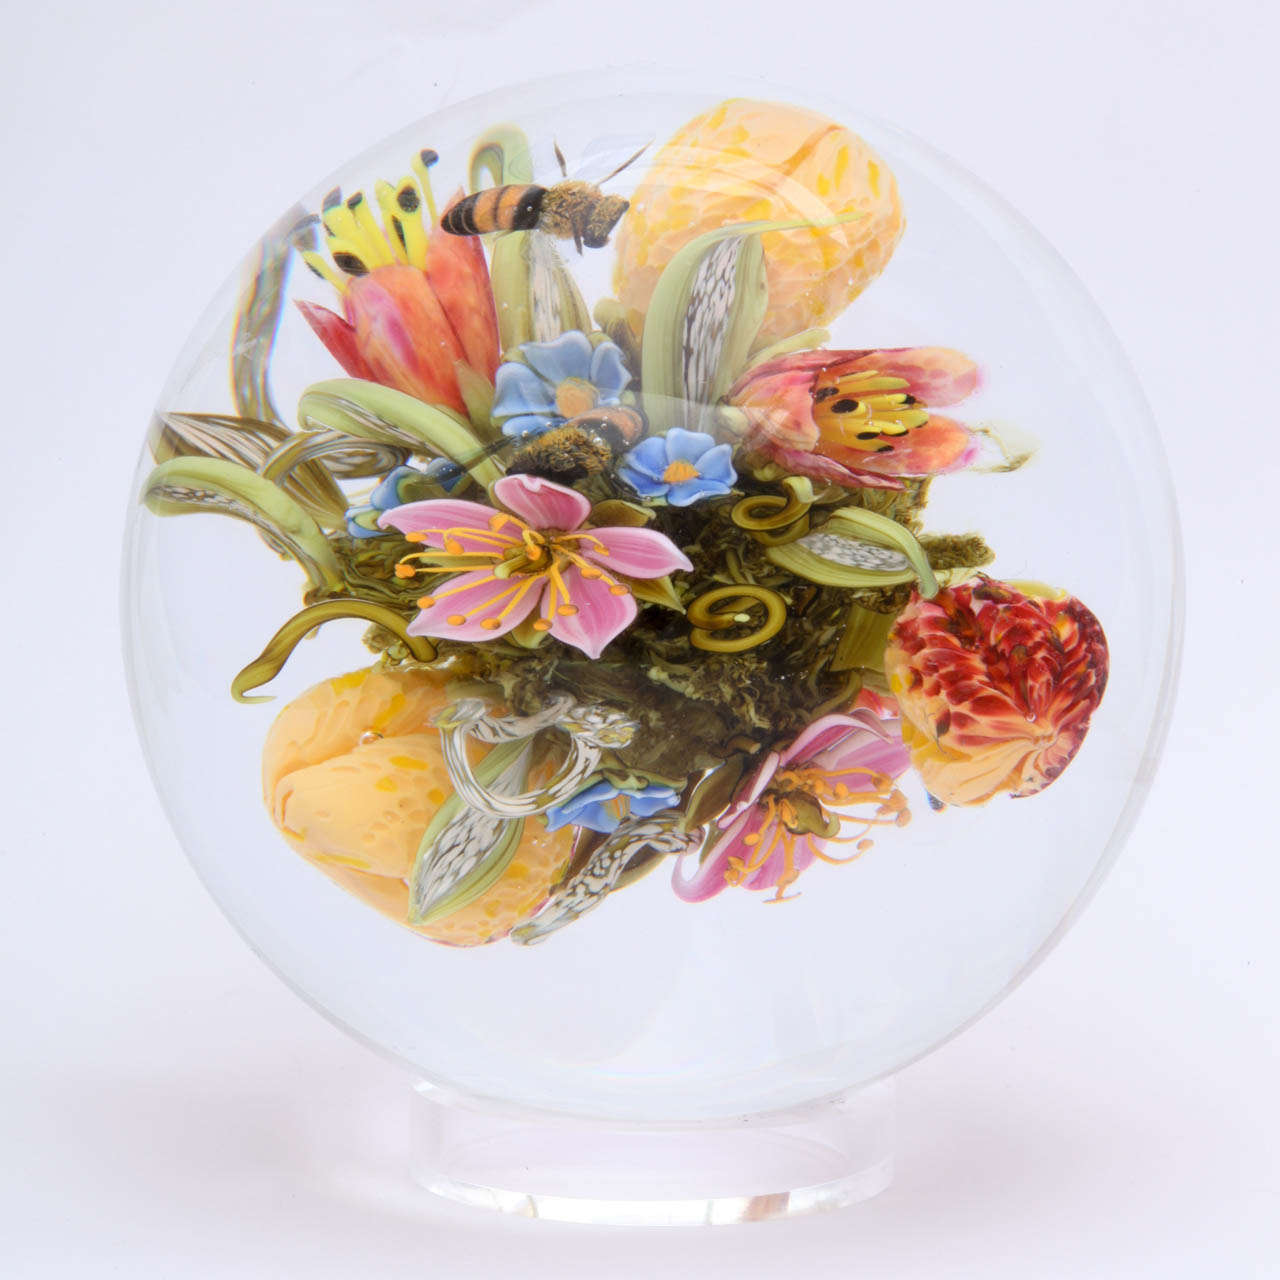 A beautiful Paul Stankard orb from the flower, fruit and nut series with two honeybees, signed Stankard 2014